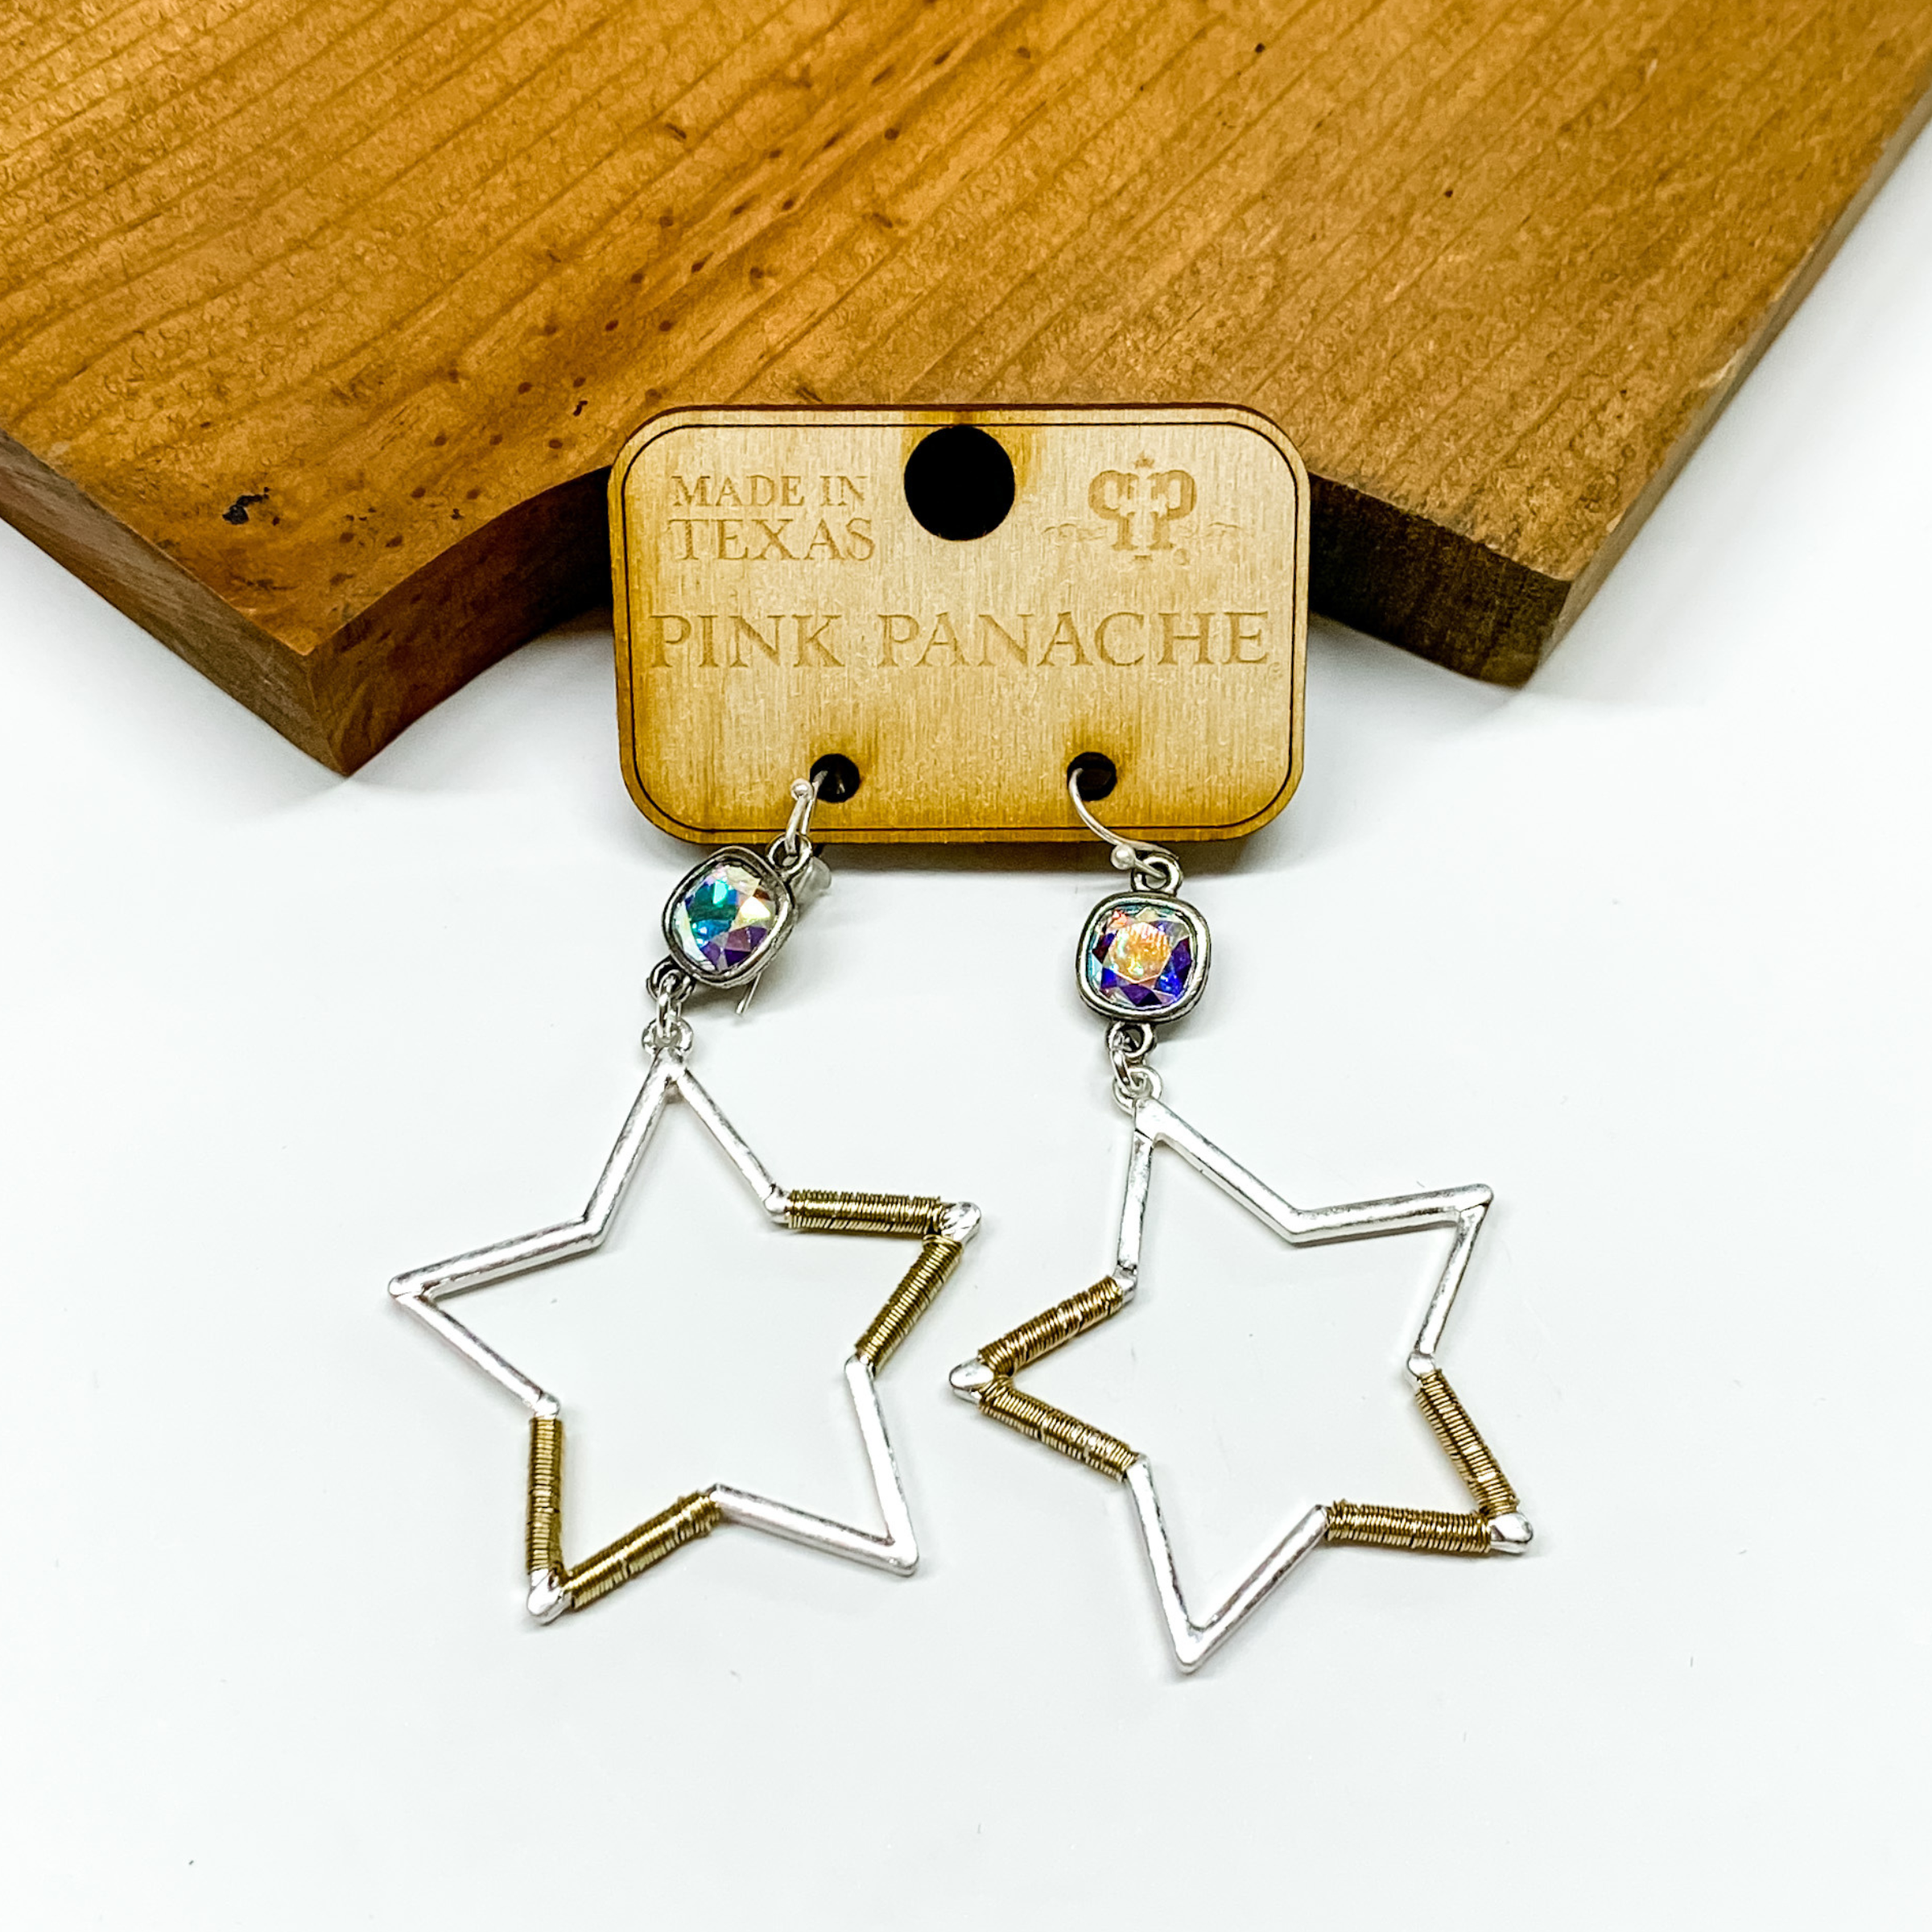 Silver and gold star earrings with an ab cushion cut crystal connectors. These earrings are pictured in front of a wood block on a white background. 